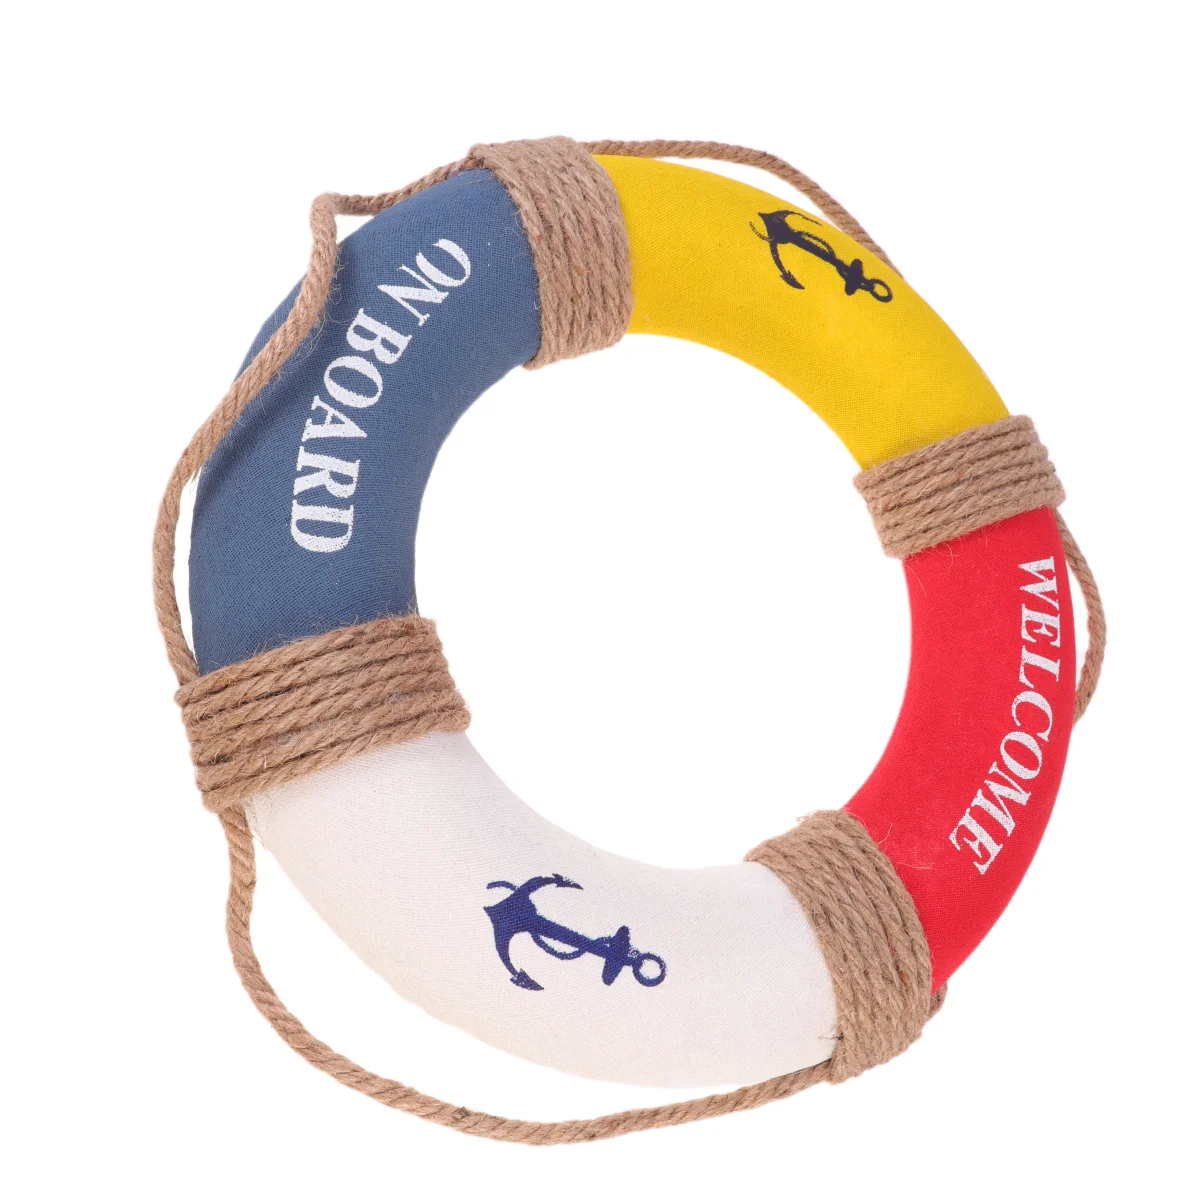 

Ring Life Wall Nautical Welcome Hanging Lifebuoy Decor Decoration Sign Decorative Door Buoy Ornament Home Beach Mediterranean